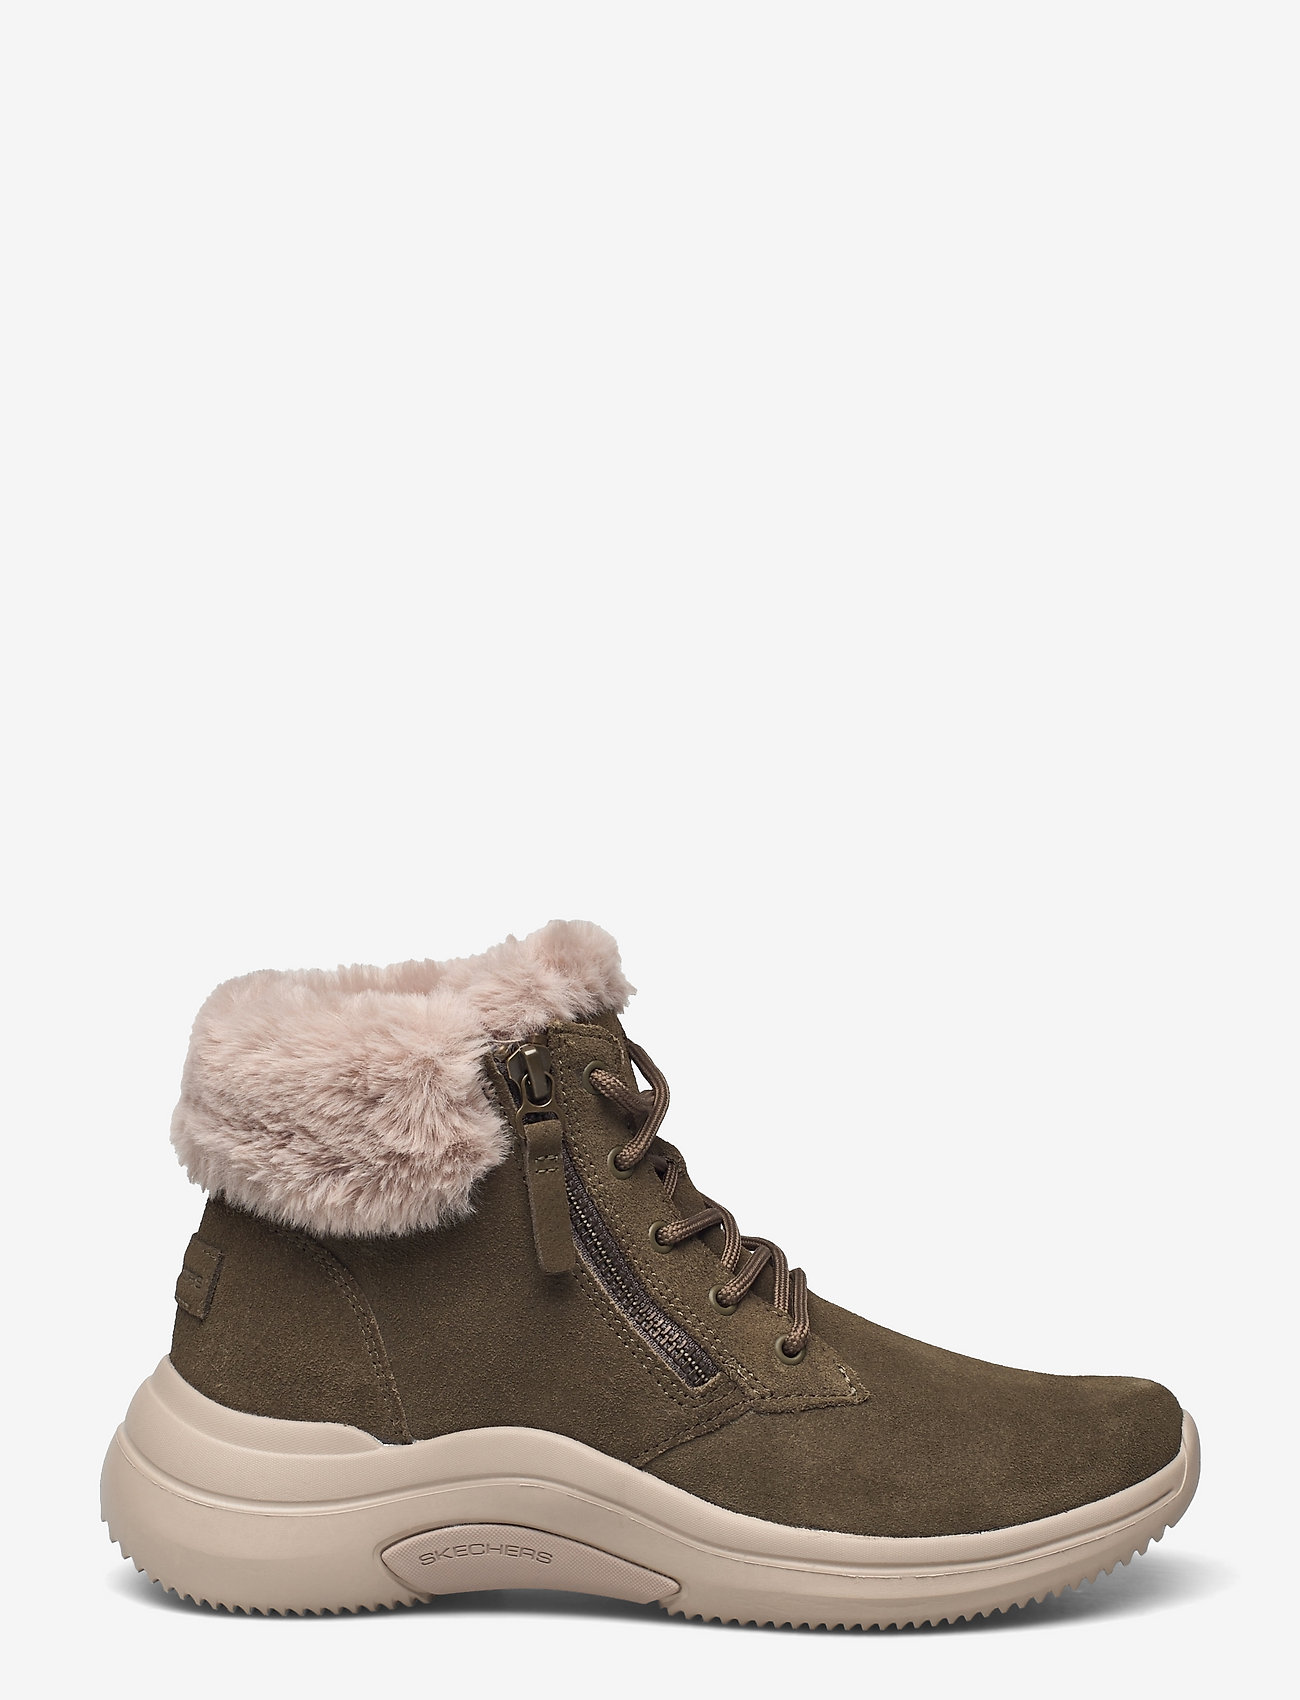 Skechers - Womens On-The-Go Midtown - Goodnatured - winterschuhe - olv olive - 1